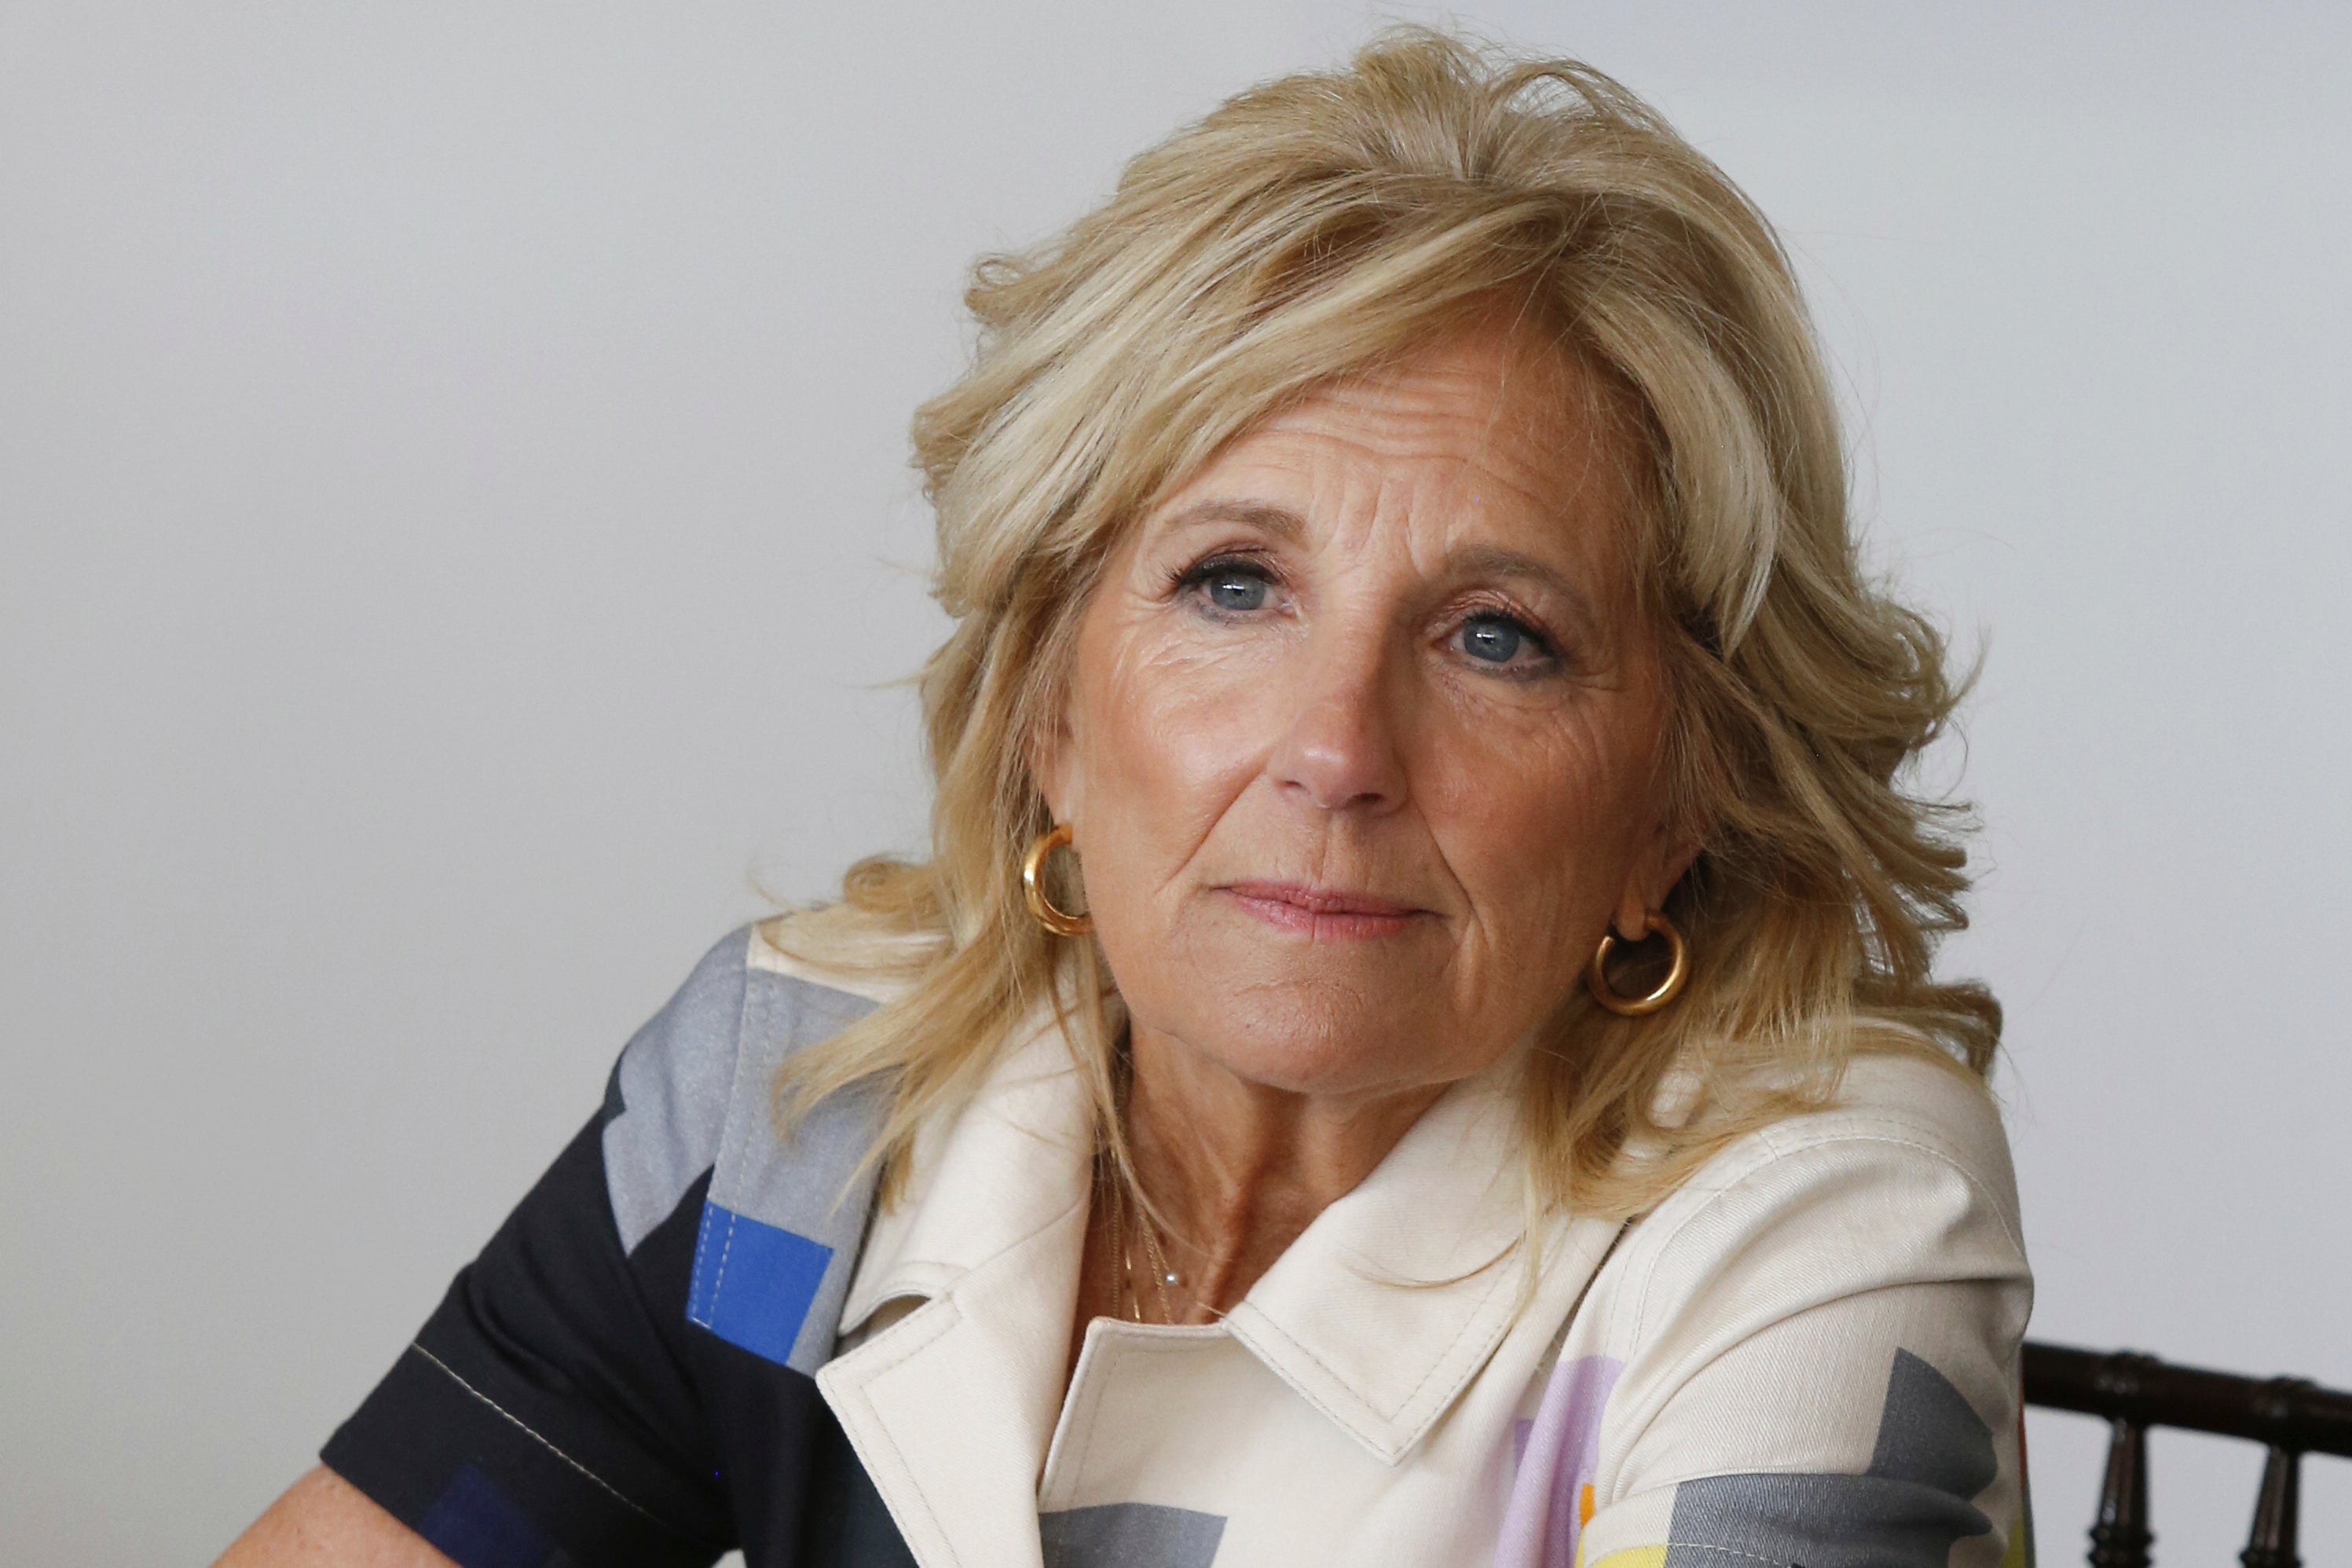 wrong with saying Dr Jill Biden? | The Independent